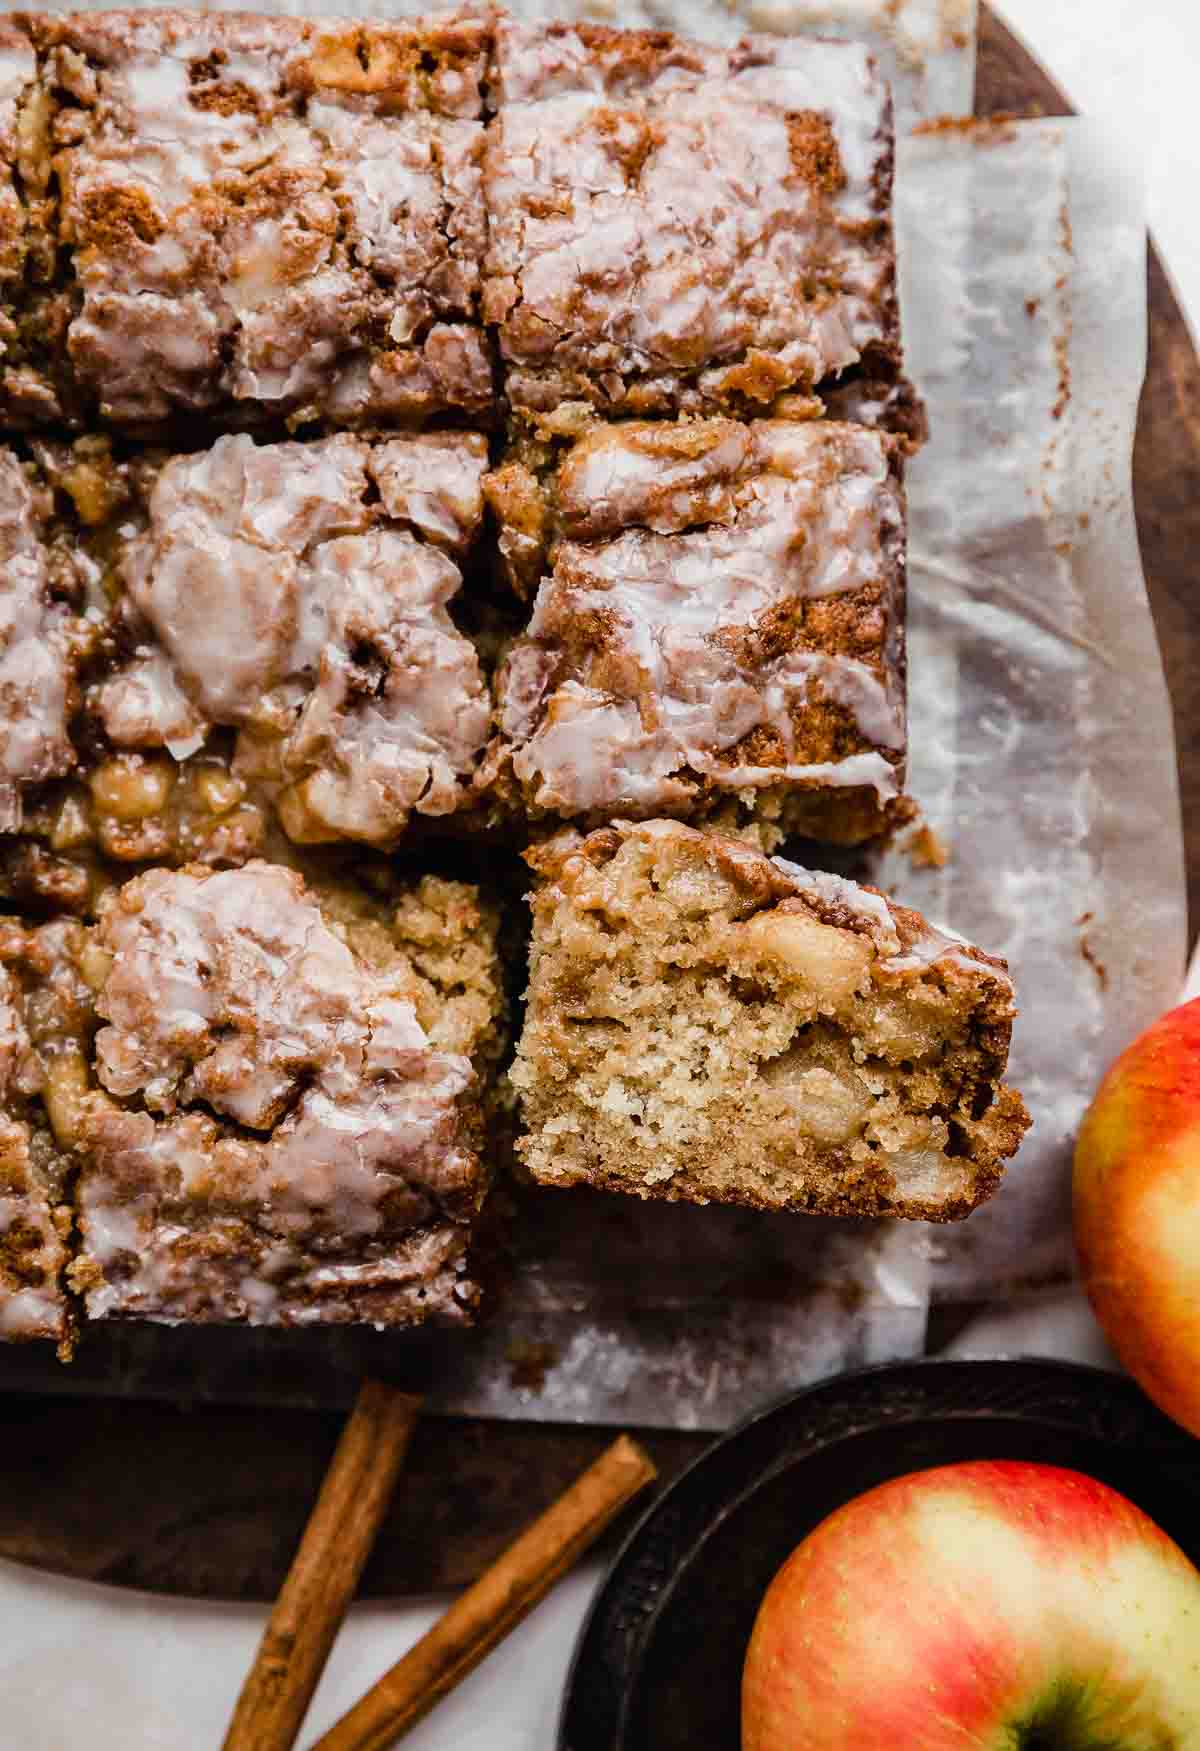 An Apple Fritter Cake sliced into squares on parchment paper.